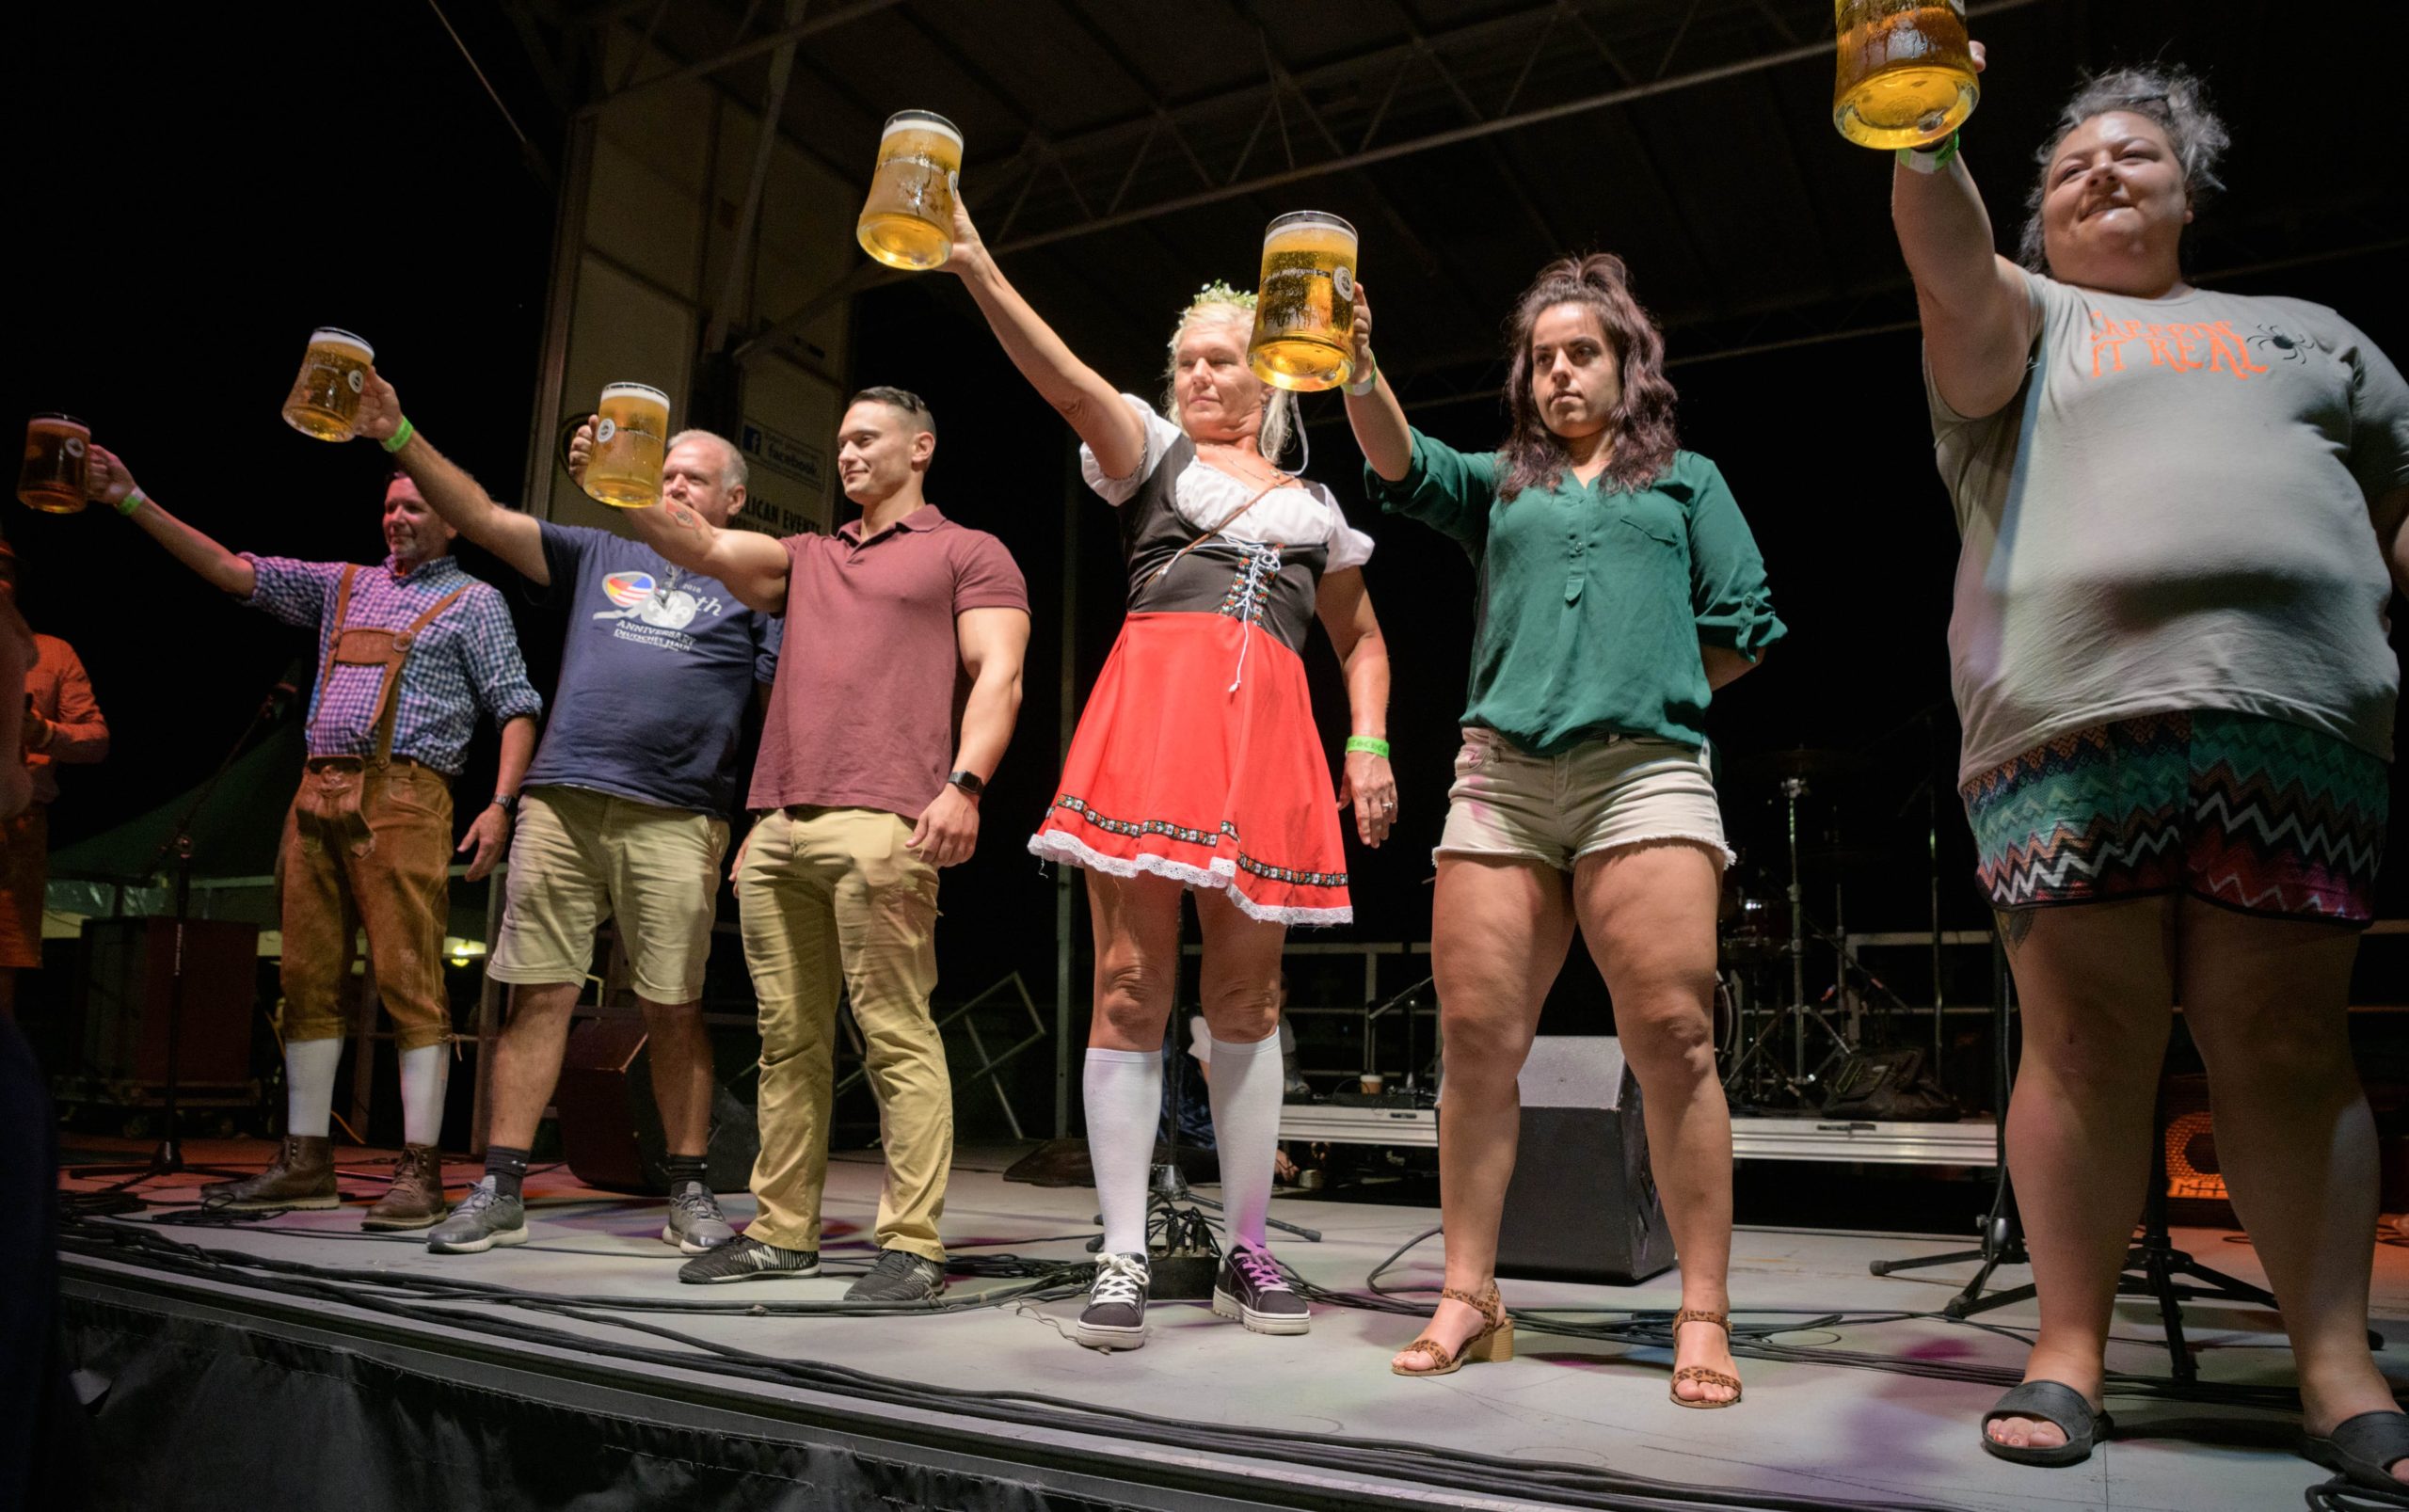 ‘Hold my beer,’ is easy to say but harder to hold for a long time when taking part in the Beer Stein Holding Contest or Masskrugstemmen at Oktoberfest 2019 at the Deutsches Haus in the Bayou St. John neighborhood in New Orleans Friday, Oct. 4, 2019. Besides seeing the hunky winners of the beer holding contest there was plenty of Lederhosen, pretzels, sausage, chicken dances, music, and cheers to go around. The event continues Saturday and will also be held Friday-Saturday for the next two weekends. Photo by Matthew Hinton